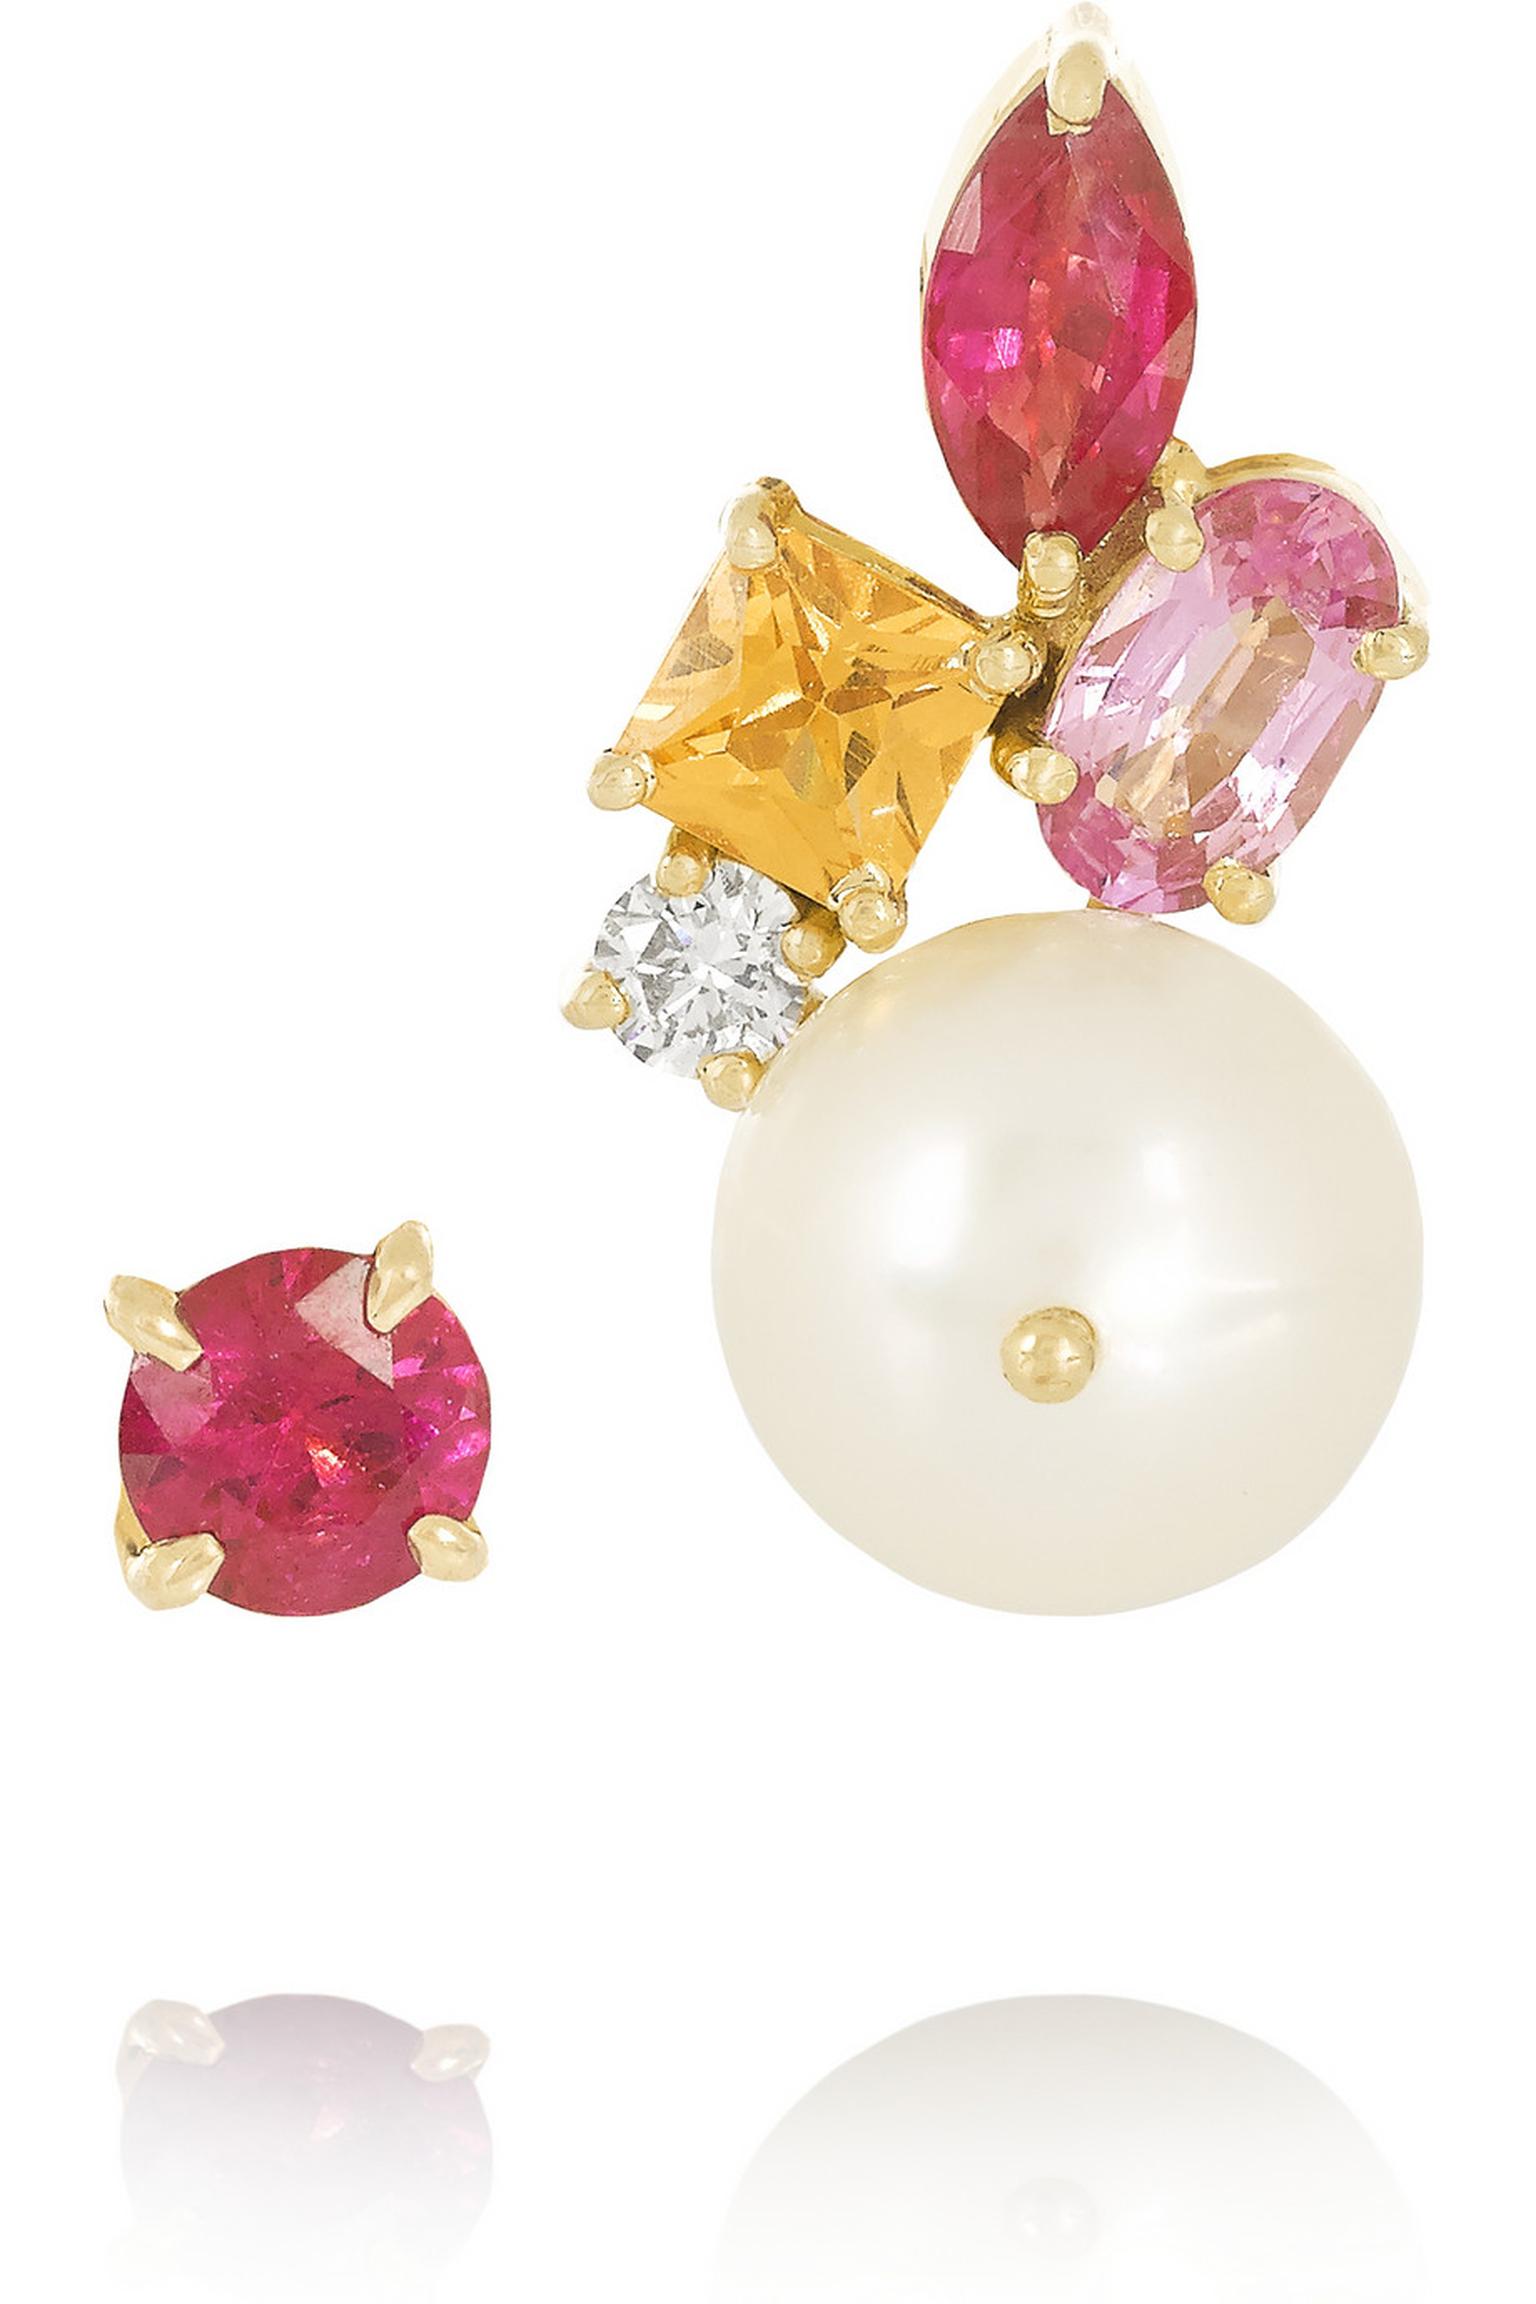 Holly Dyment mismatched pearl earrings with rubies, a mandarin garnet, a pink sapphire and a diamond ($2,270).